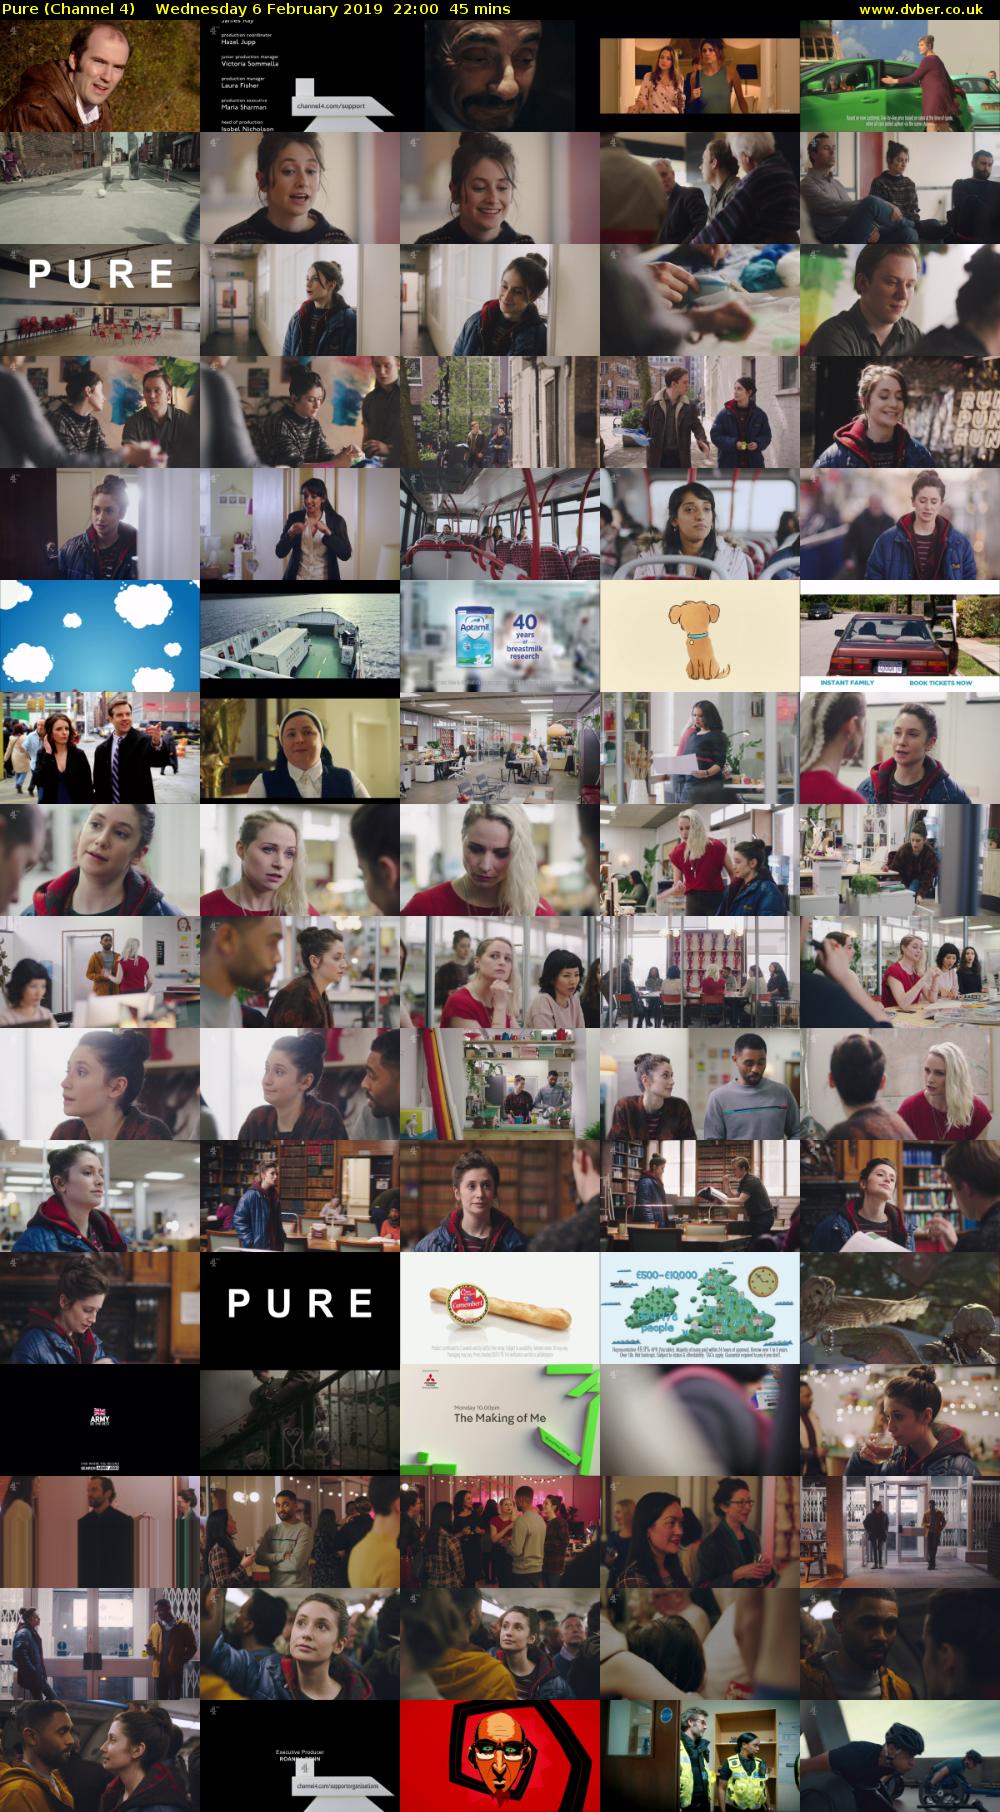 Pure (Channel 4) Wednesday 6 February 2019 22:00 - 22:45